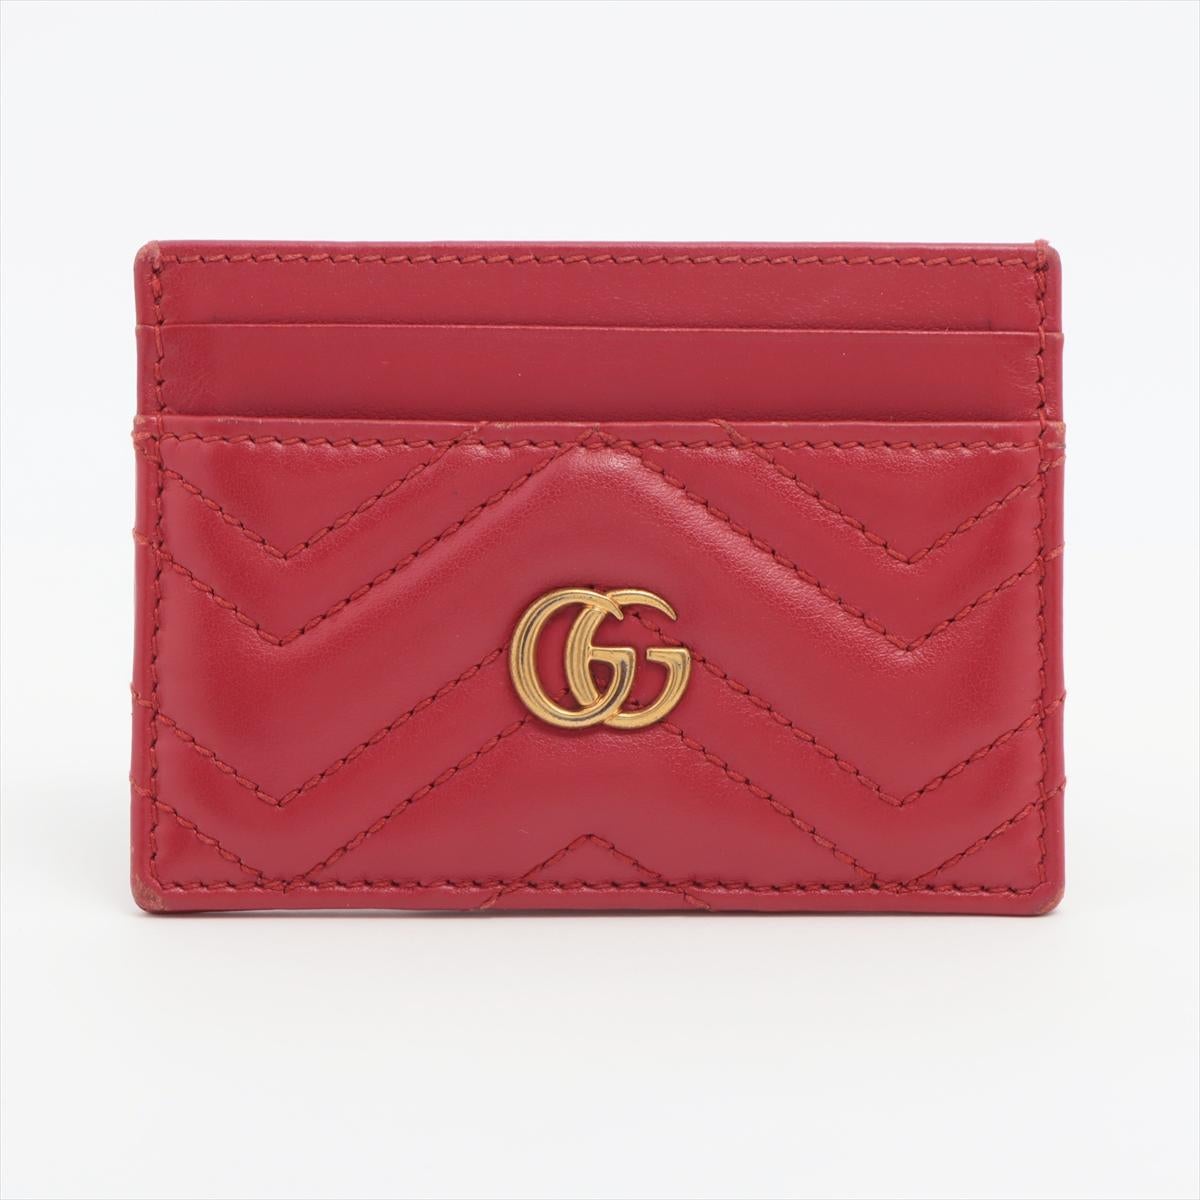 The Gucci GG Marmont Leather Card Case in Red is a stylish and compact accessory that seamlessly blends luxury with practicality. Crafted from high-quality red leather, the card case features the iconic GG Marmont matelassé pattern, showcasing